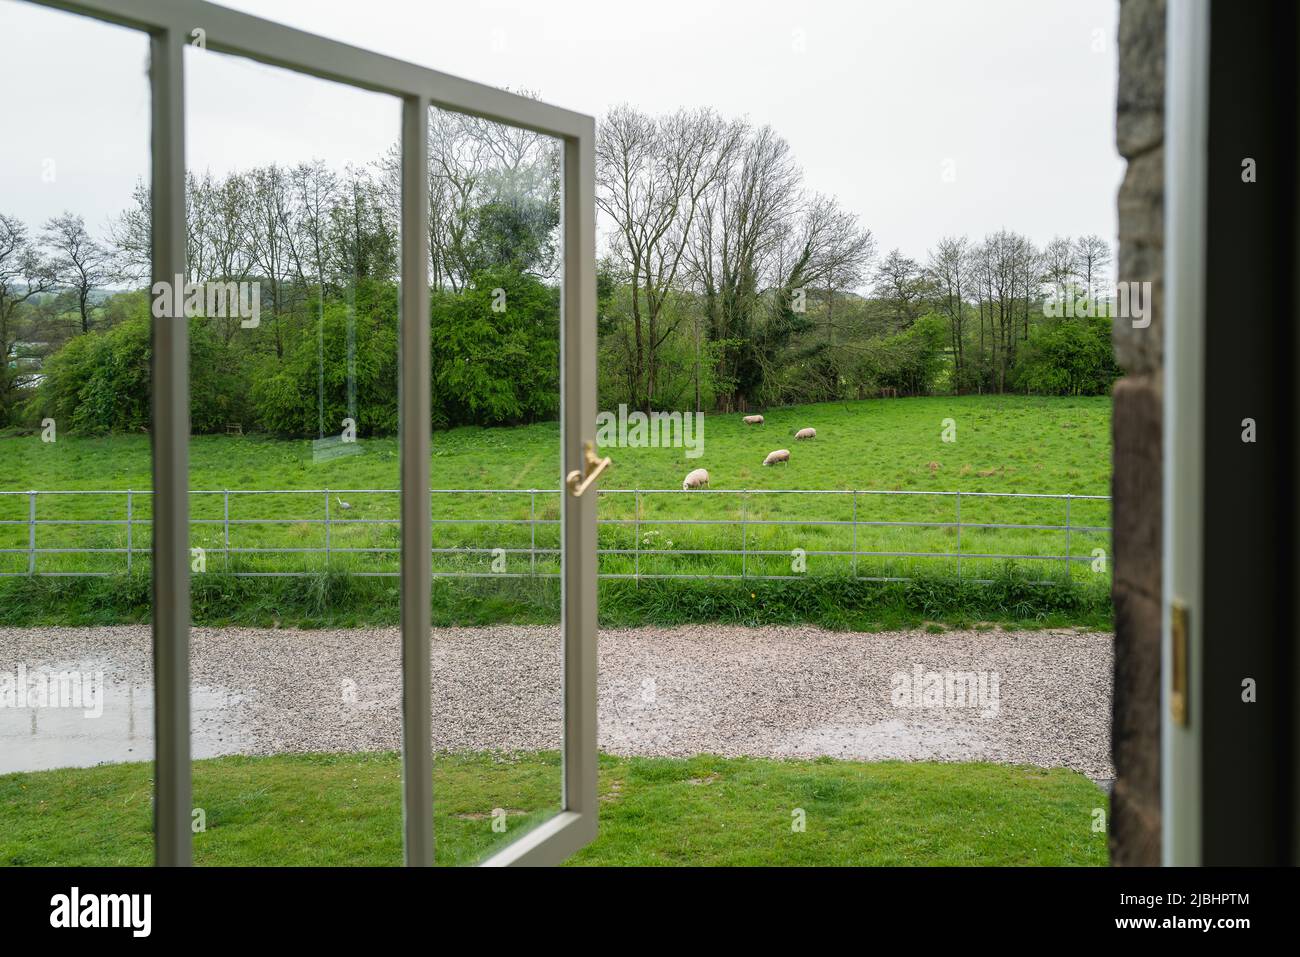 Sheep in a field of grass with trees seen through an open window on a wet day. Stock Photo